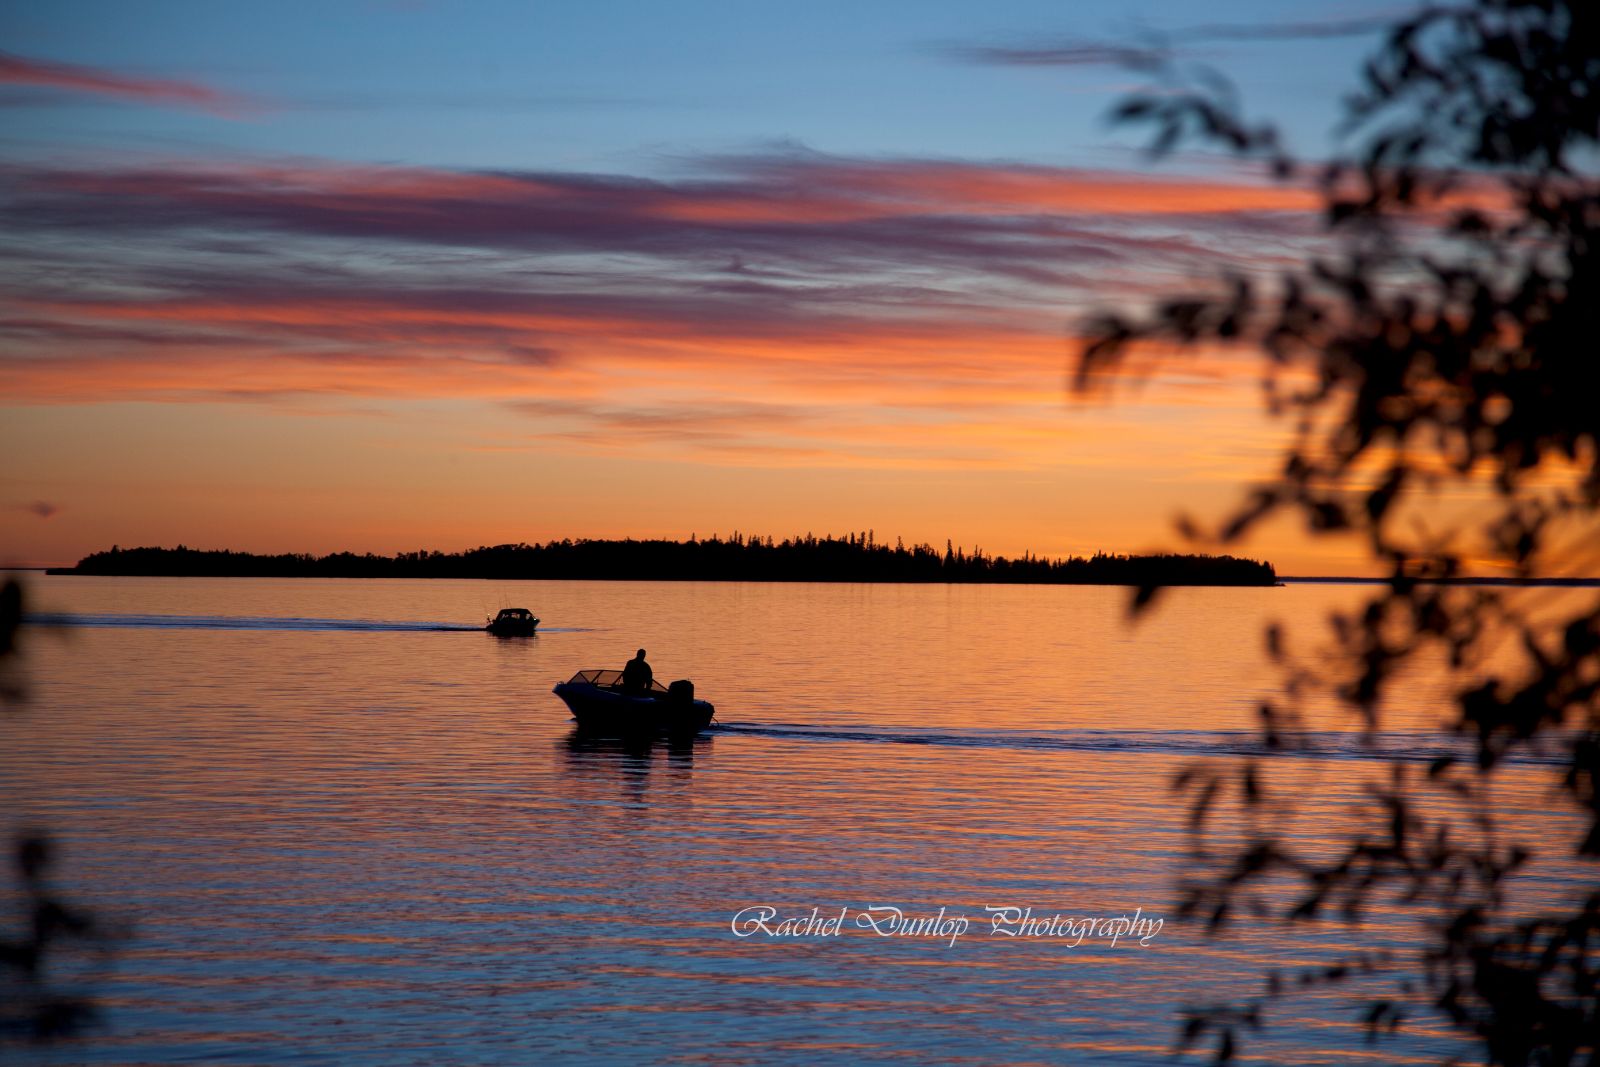 Two boats at sunset in the Slave Lake Region of Northern Alberta, shown as dark silhouettes against an orange, pink and purple sunset, with an island silhouette in the distance